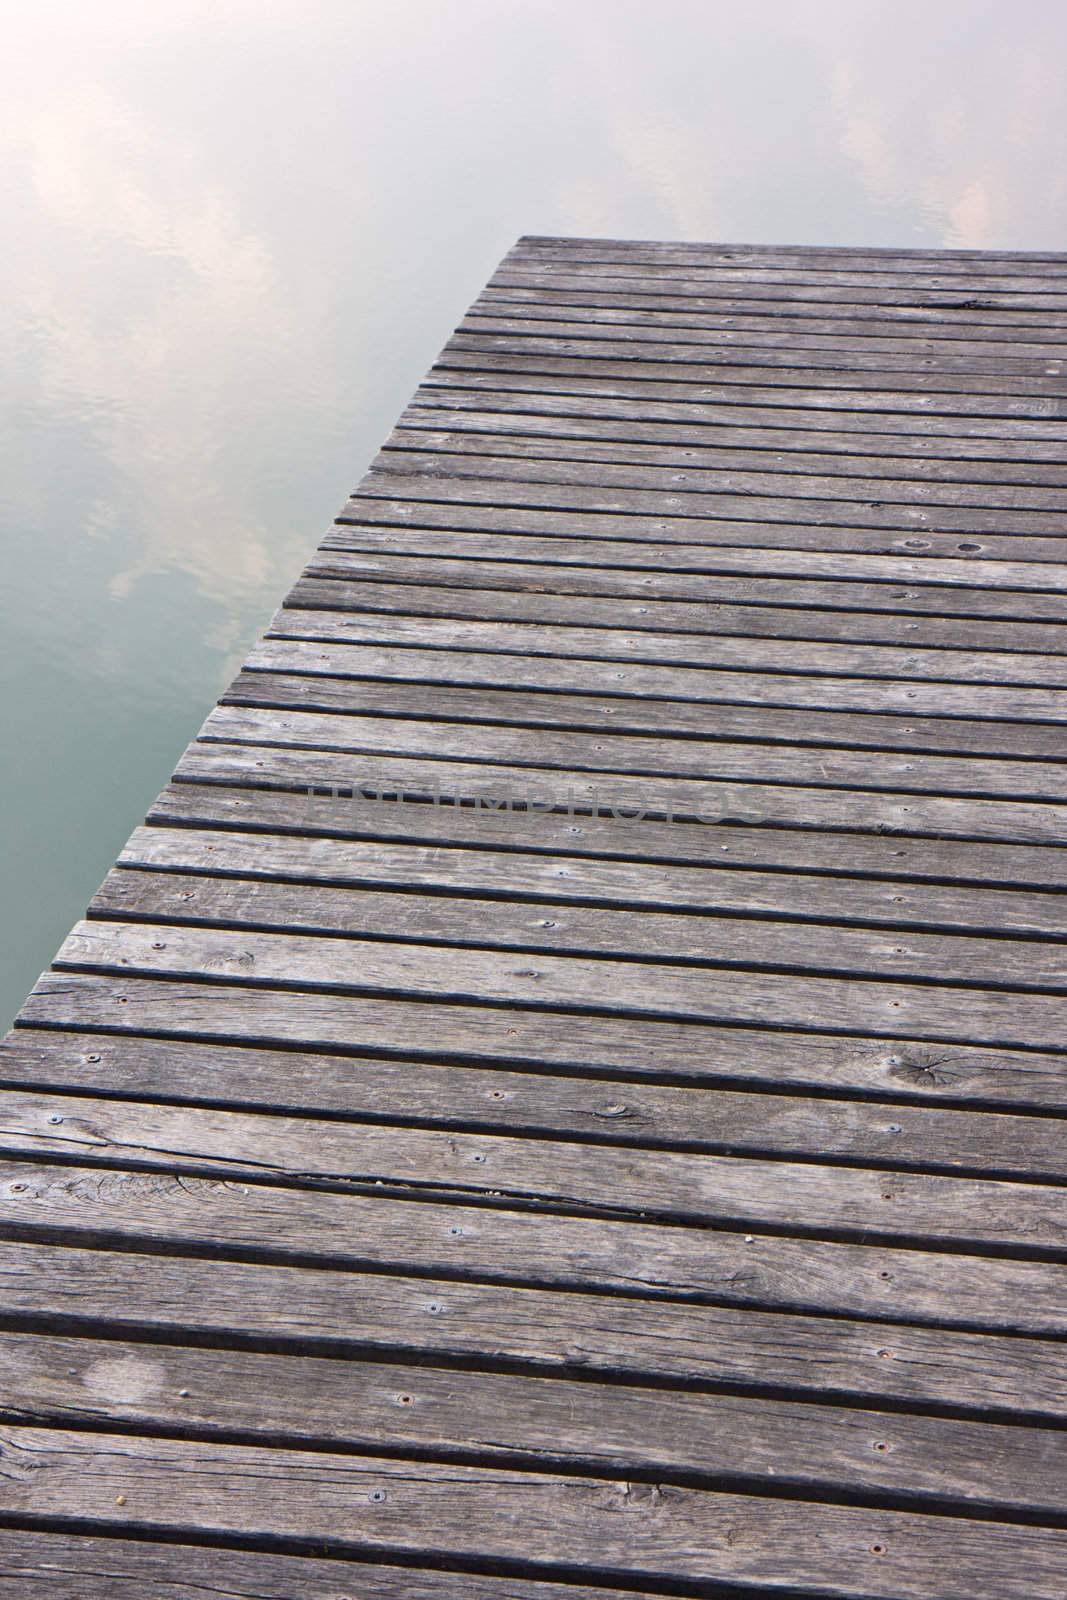 abstract view of a wooden footbridge on a lake